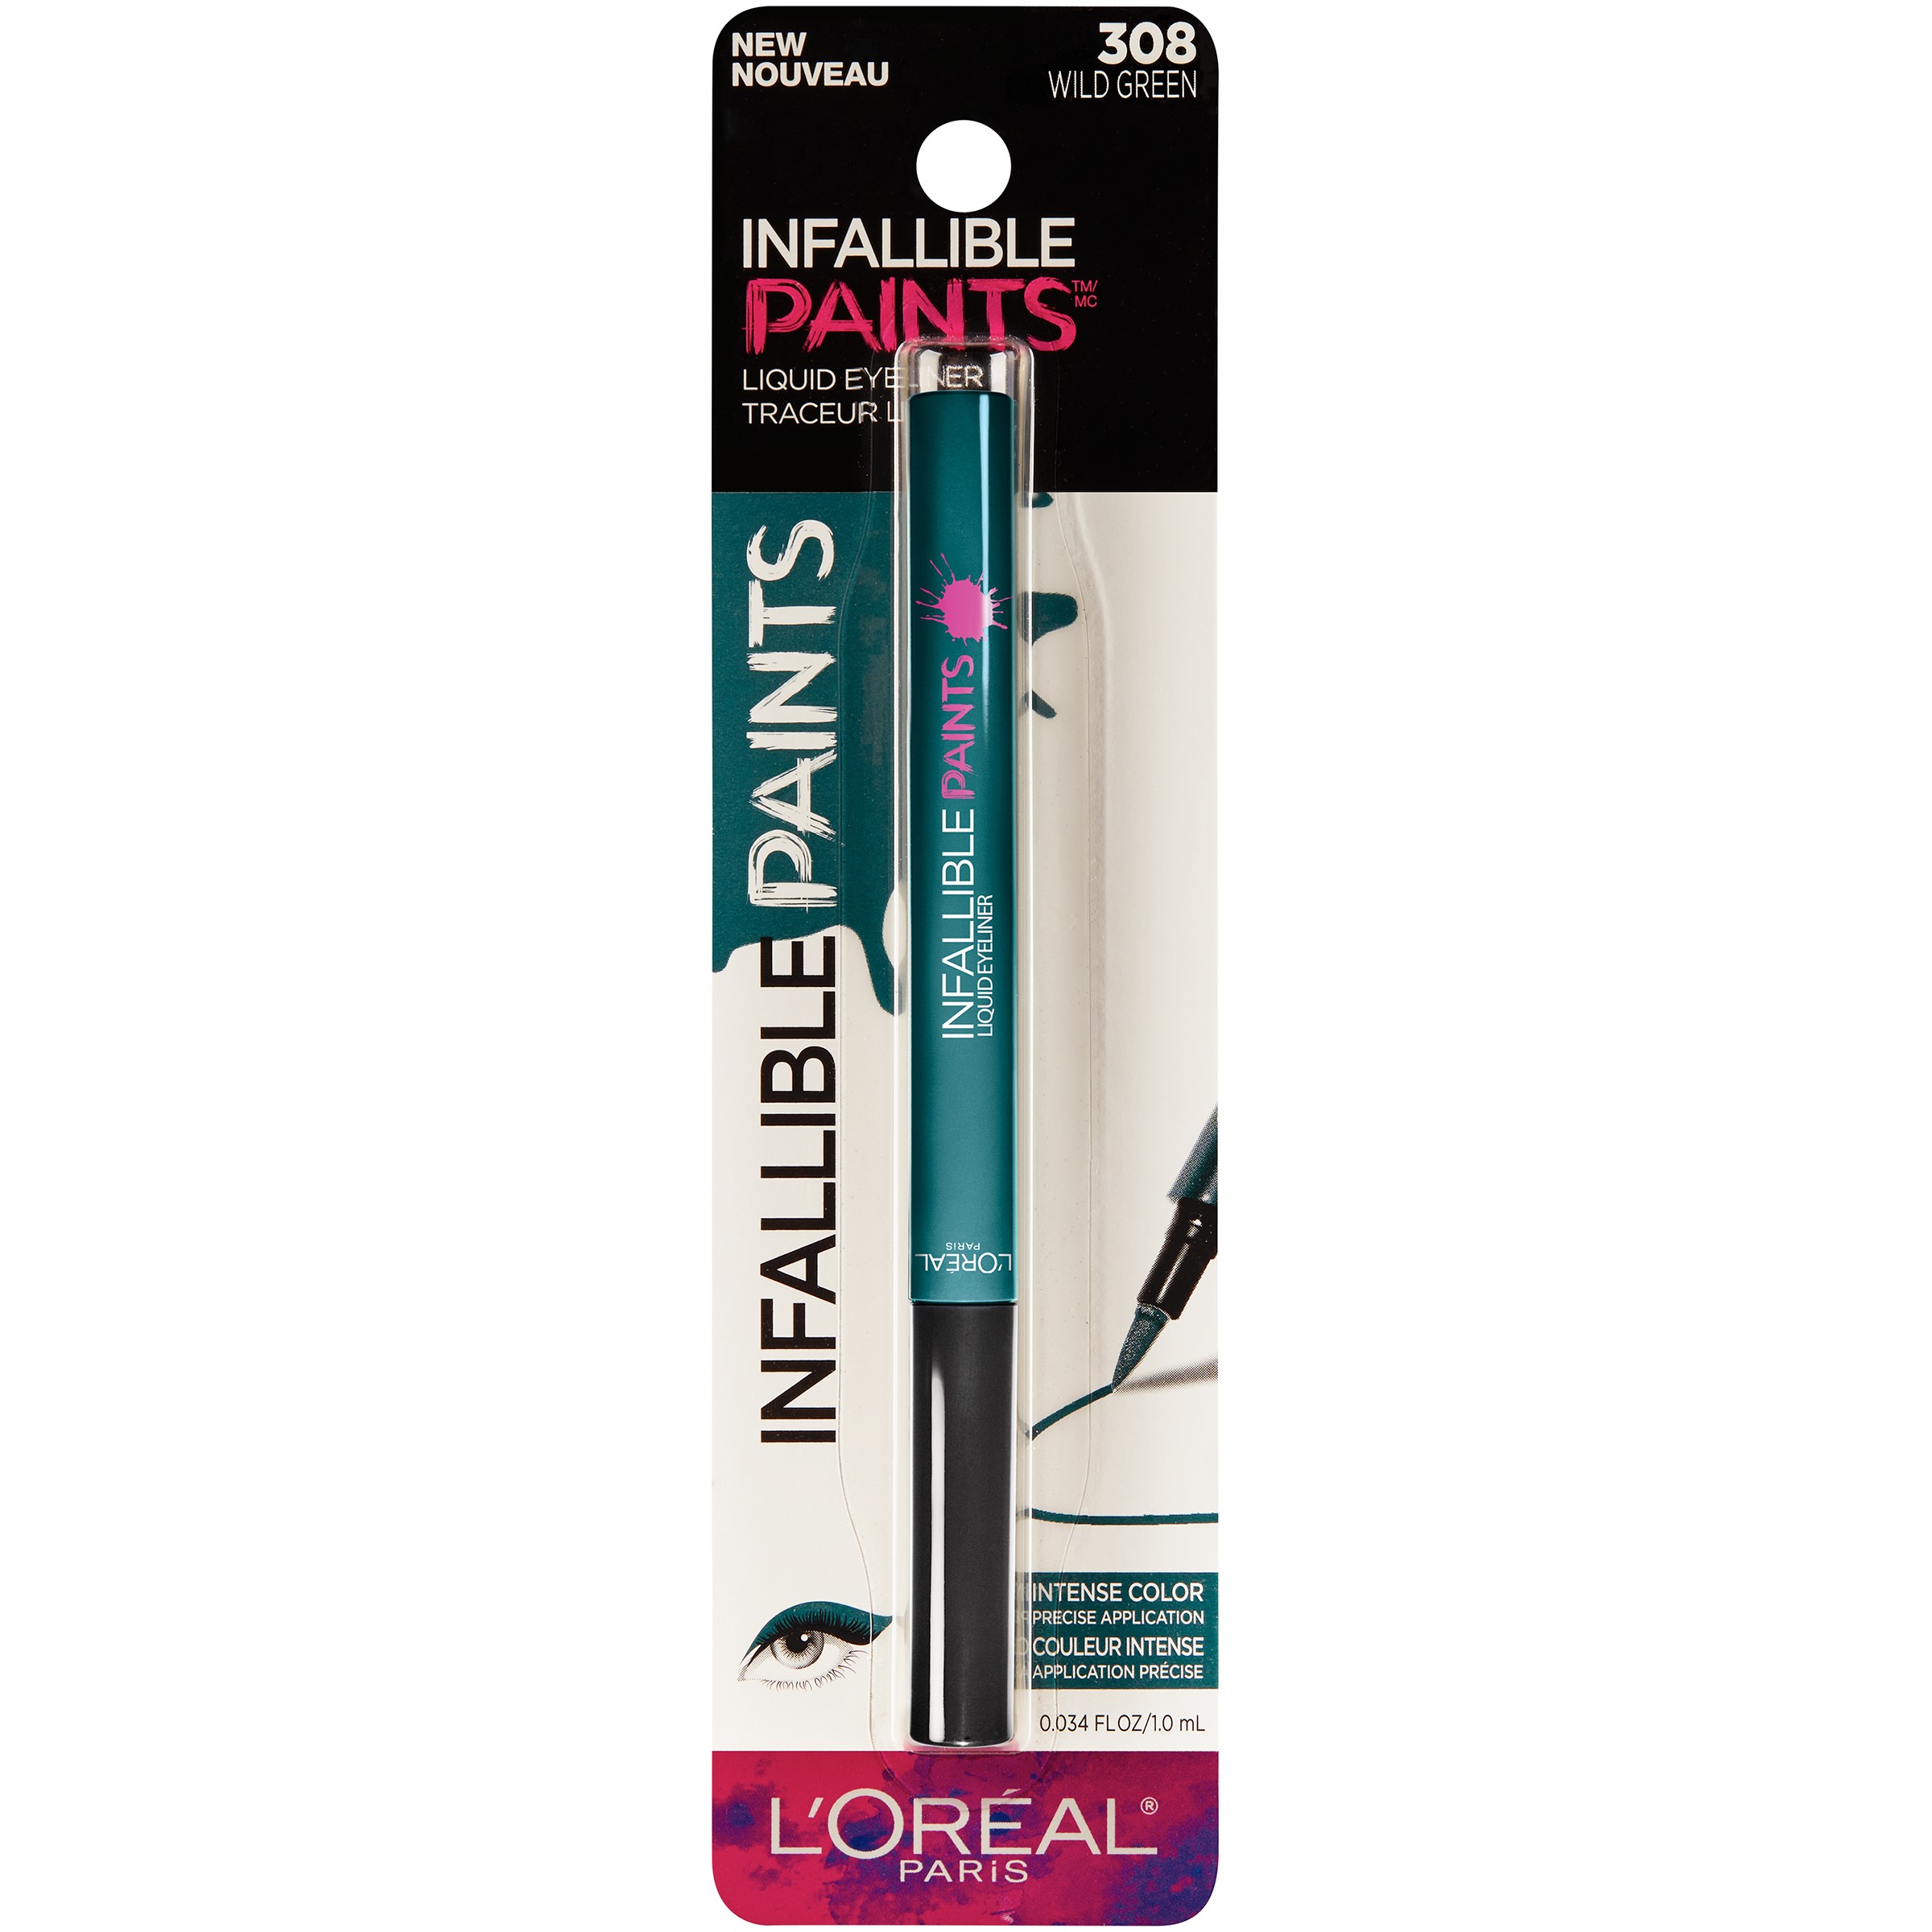 L'Oreal Paris Infallible Paints Eyeliner, Wild Green - image 3 of 7